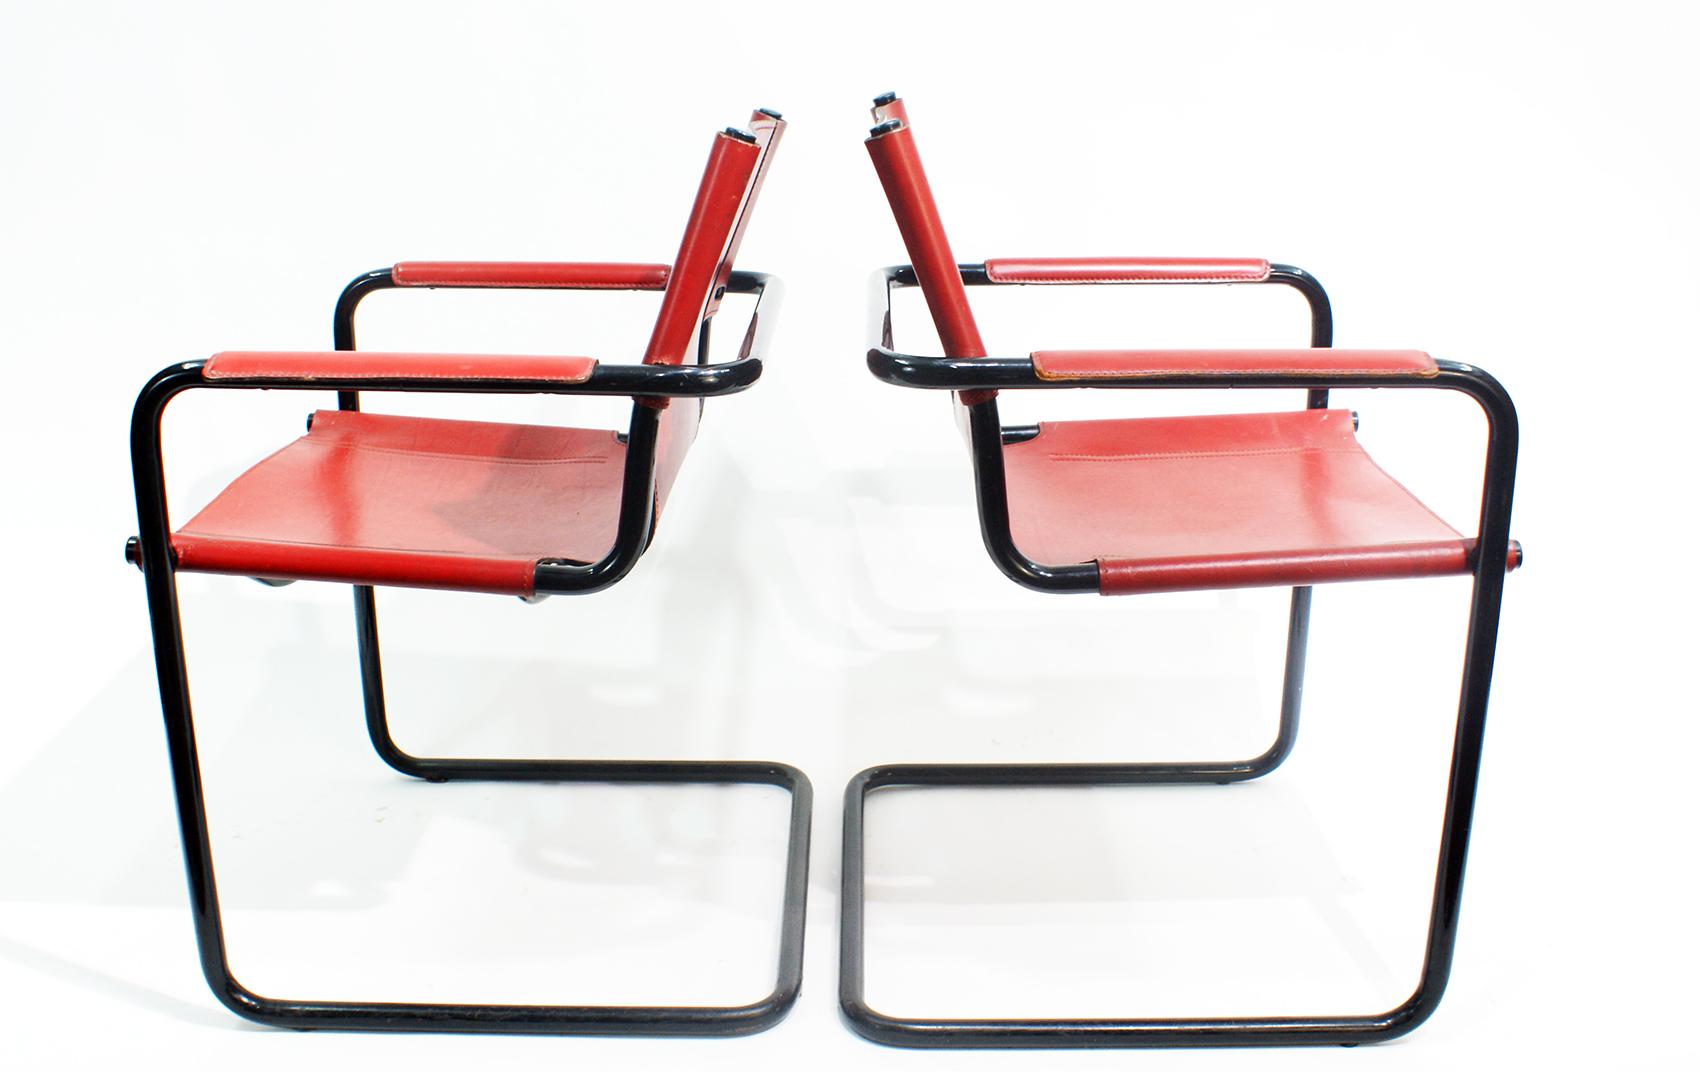 Vintage Matteo Grassi cantilever stylish visitor side chairs, Italy, 1970s. Signed Matteo Grassi on the leather. It is a Bauhaus chair designed by Mart Stam for Matteo Grassi in the 1970s. In the style of Marcel Breuer. The chair features red